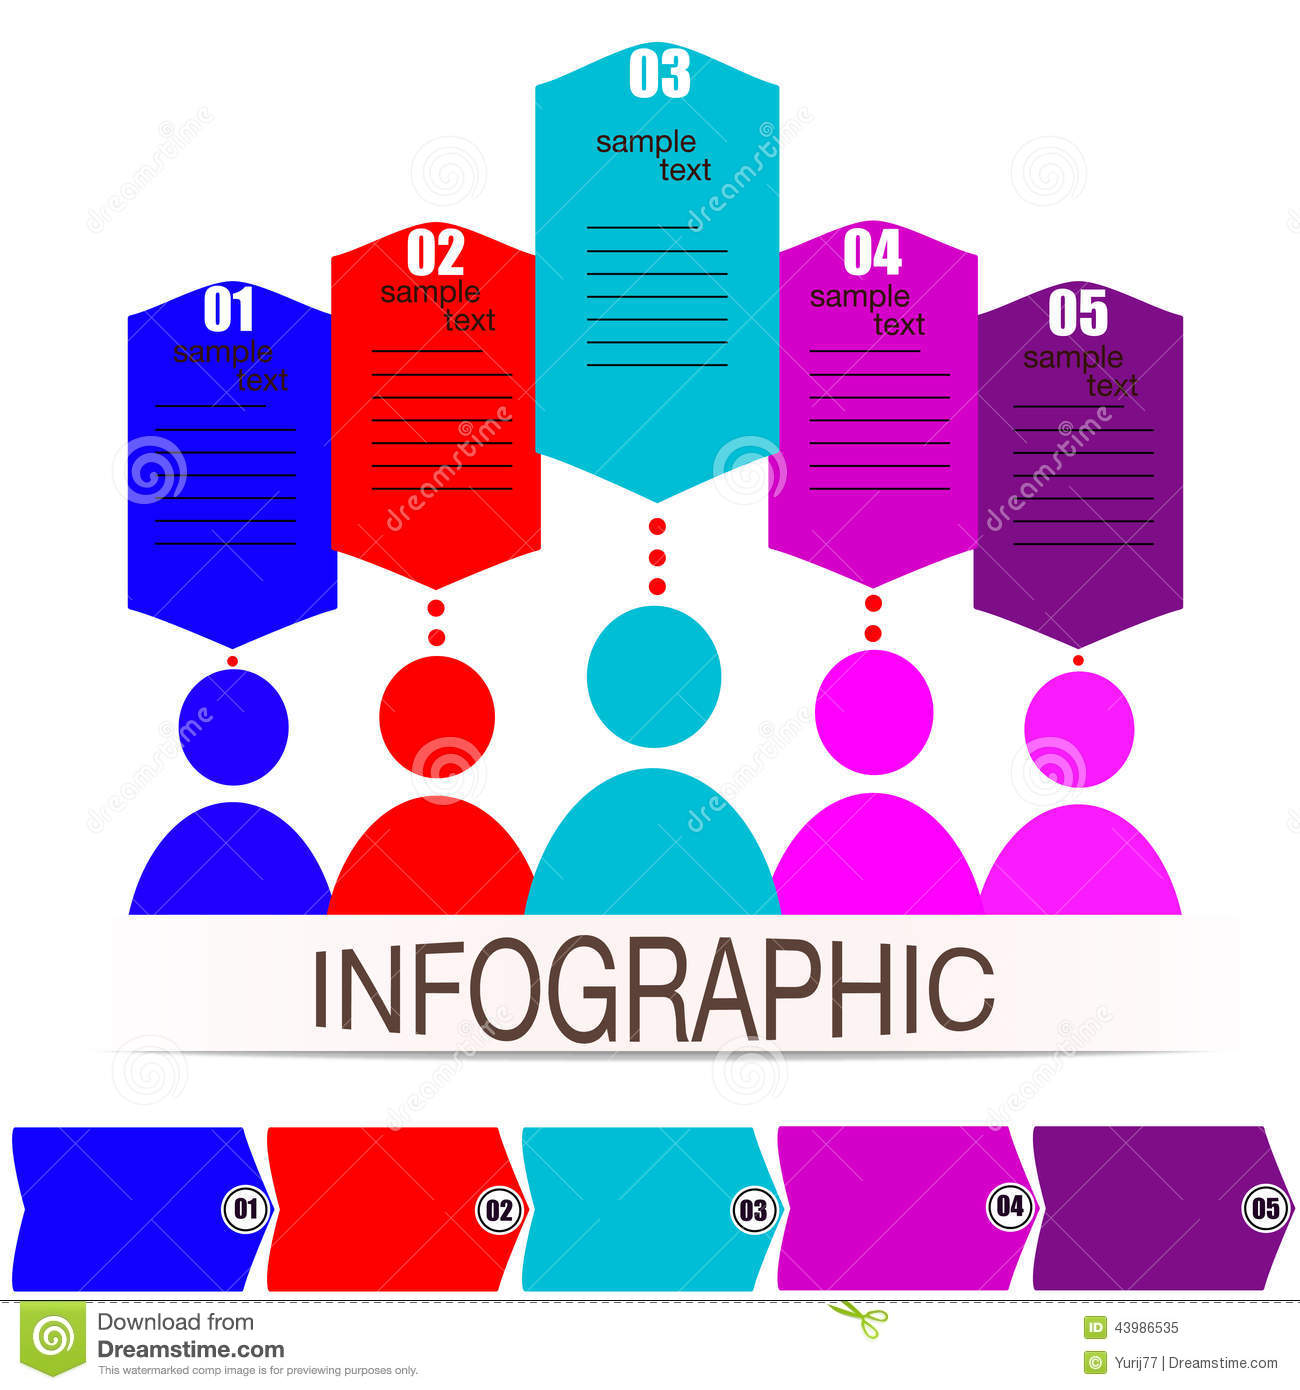 Infographic Communication in Person